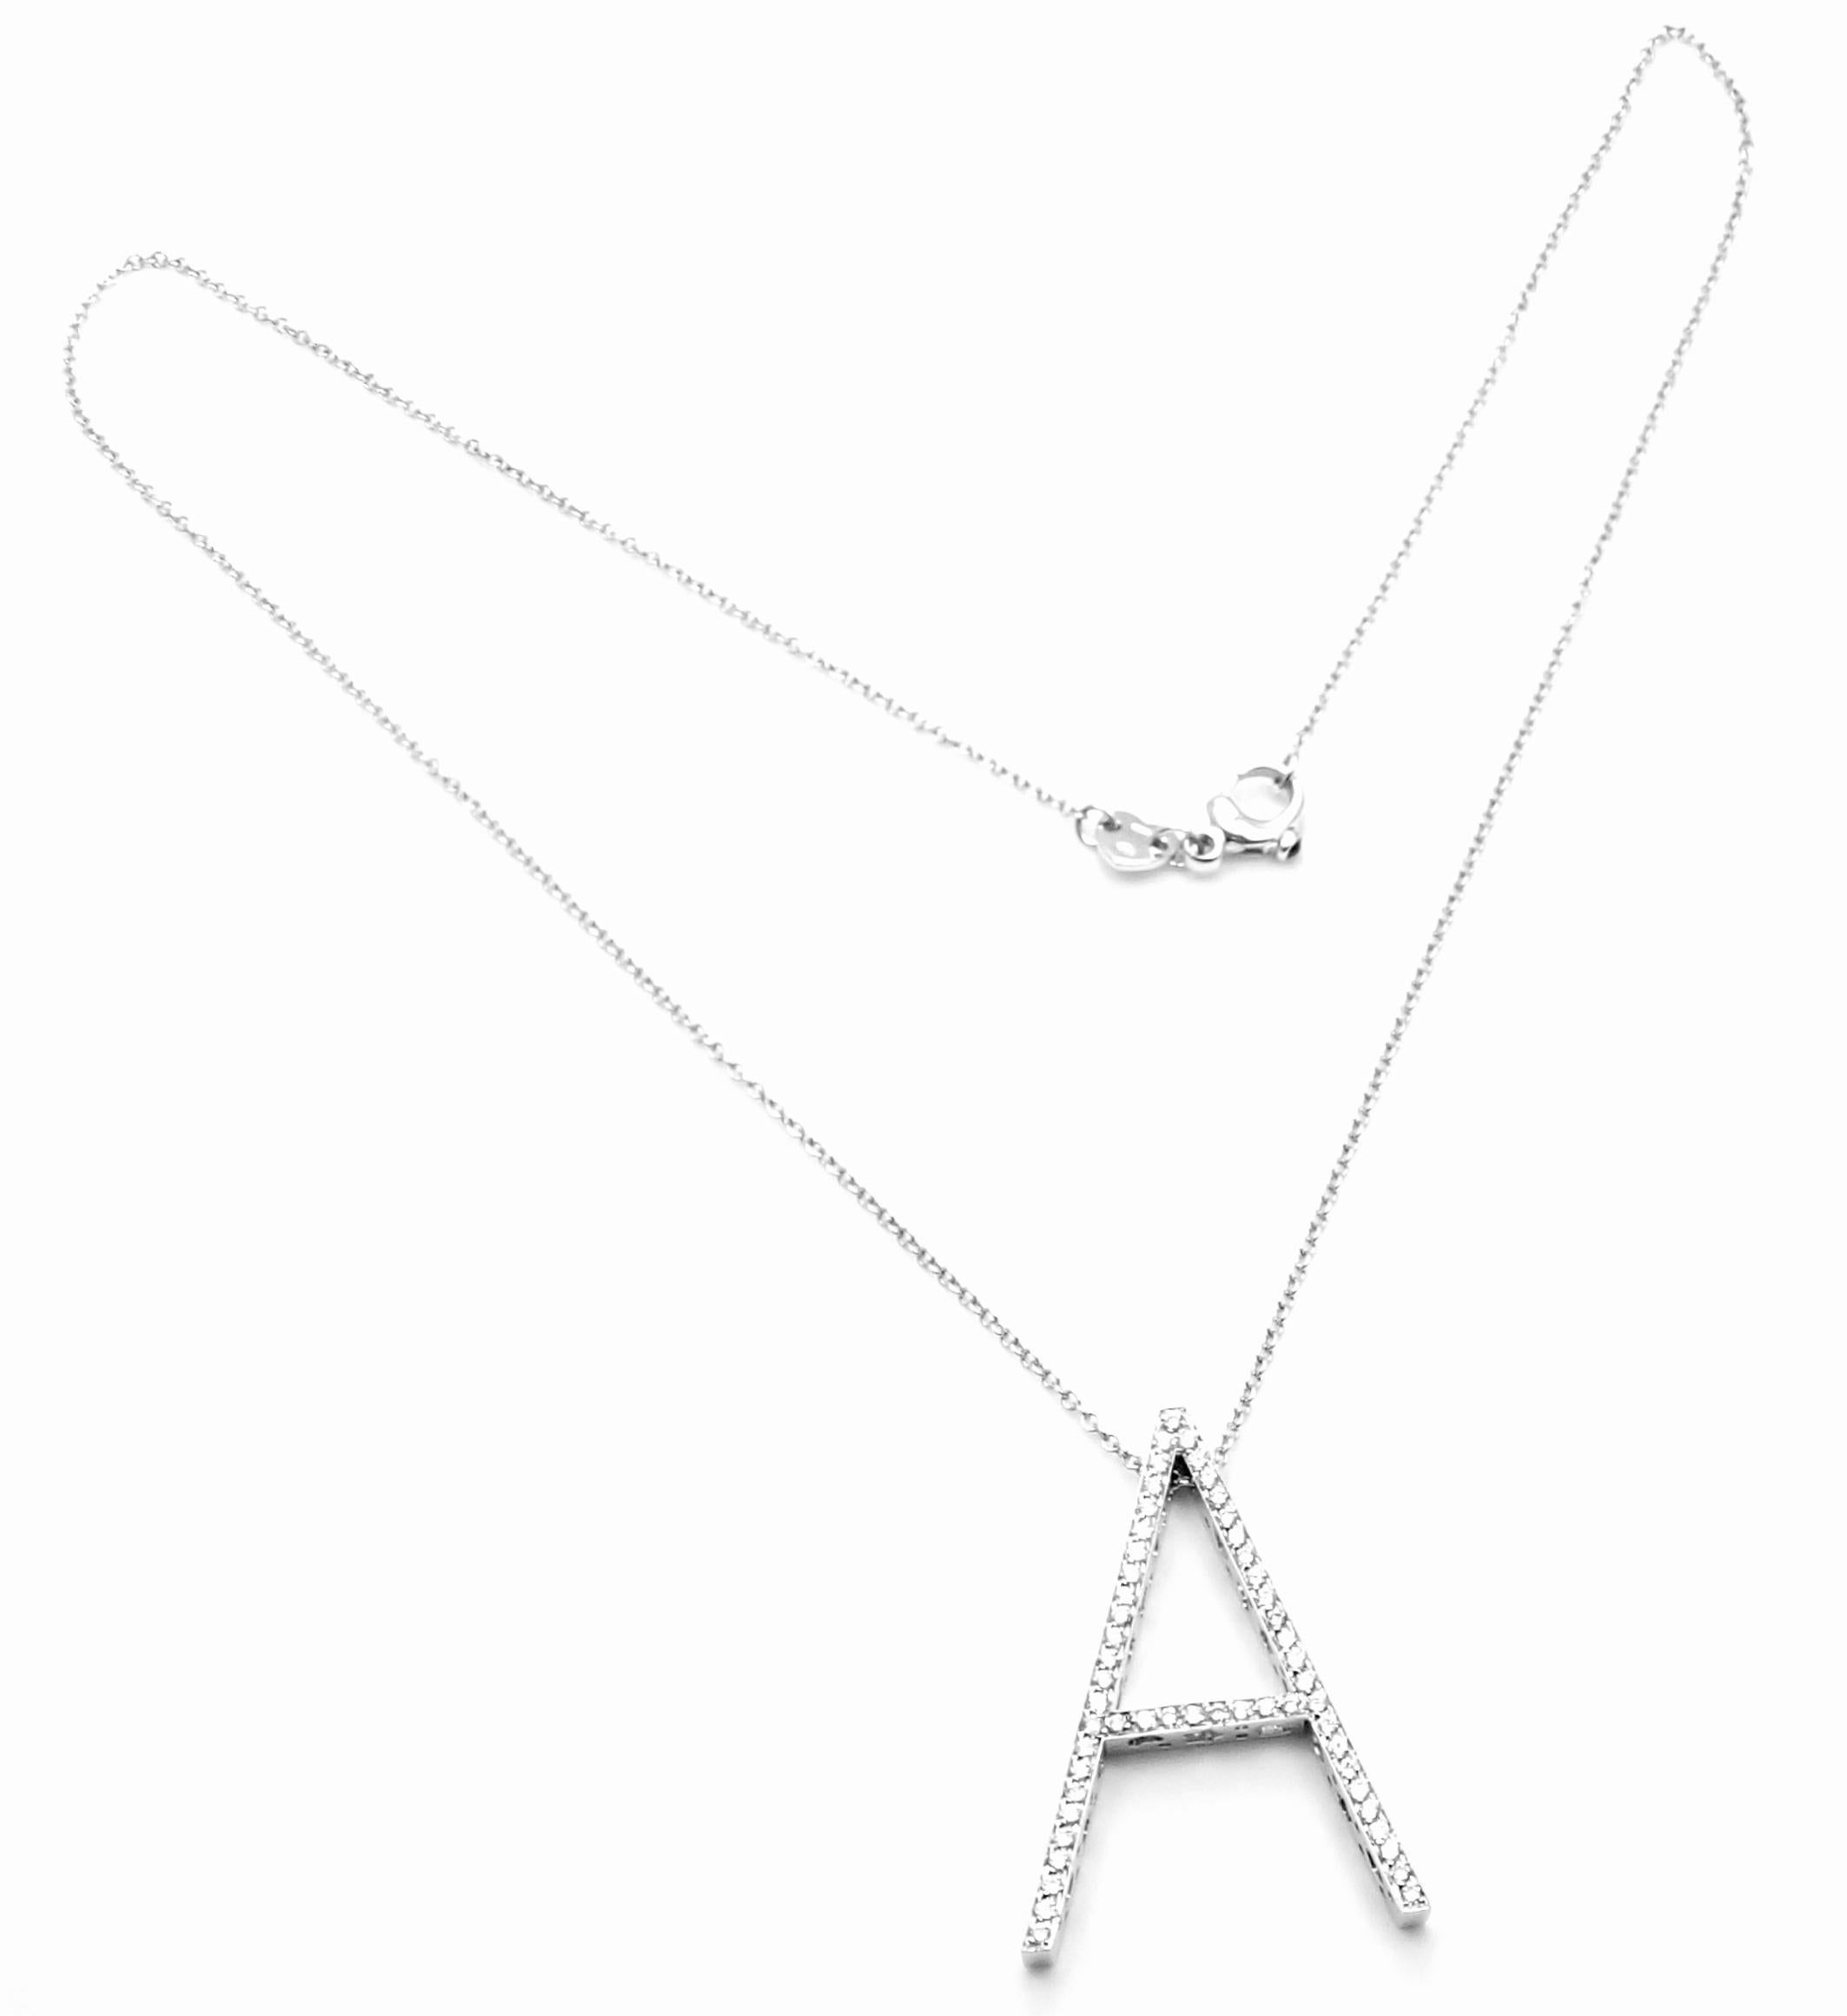 18k White Gold Large Diamond Letter A Pendant Necklace by Pasquale Bruni. 
With r55 round brilliant cut diamonds VS1 clarity, E color total weight approx. .71ct
This necklace comes with Box, Certificate and Tag.
Retail Price: